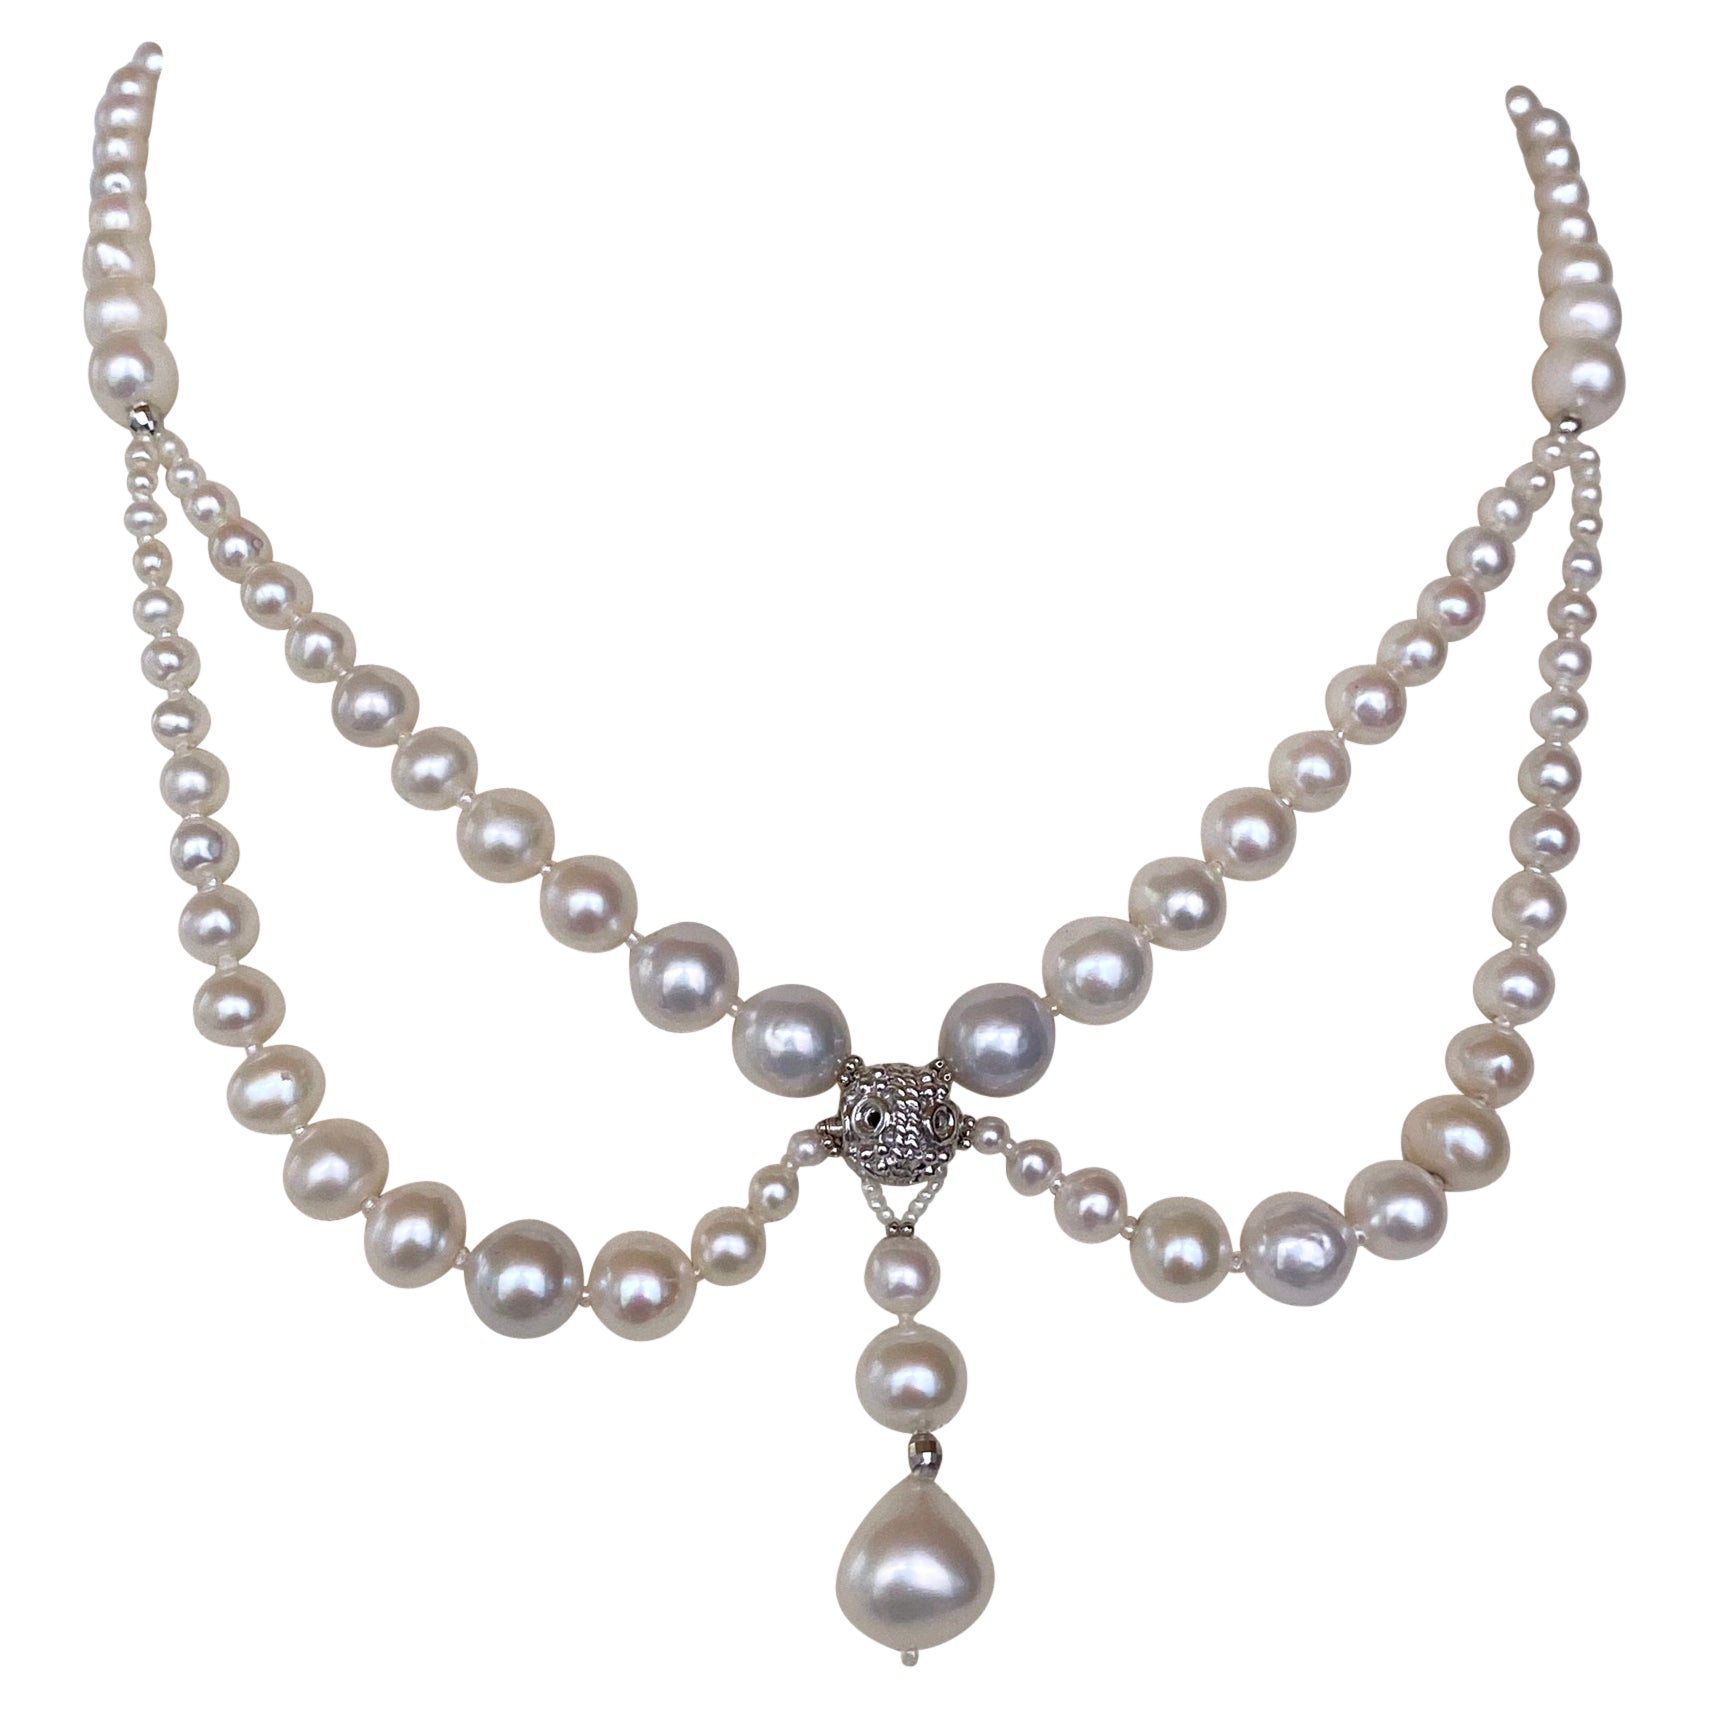 Marina J. Victorian Inspired Pearl and Rhodium Draped Romance Necklace For Sale